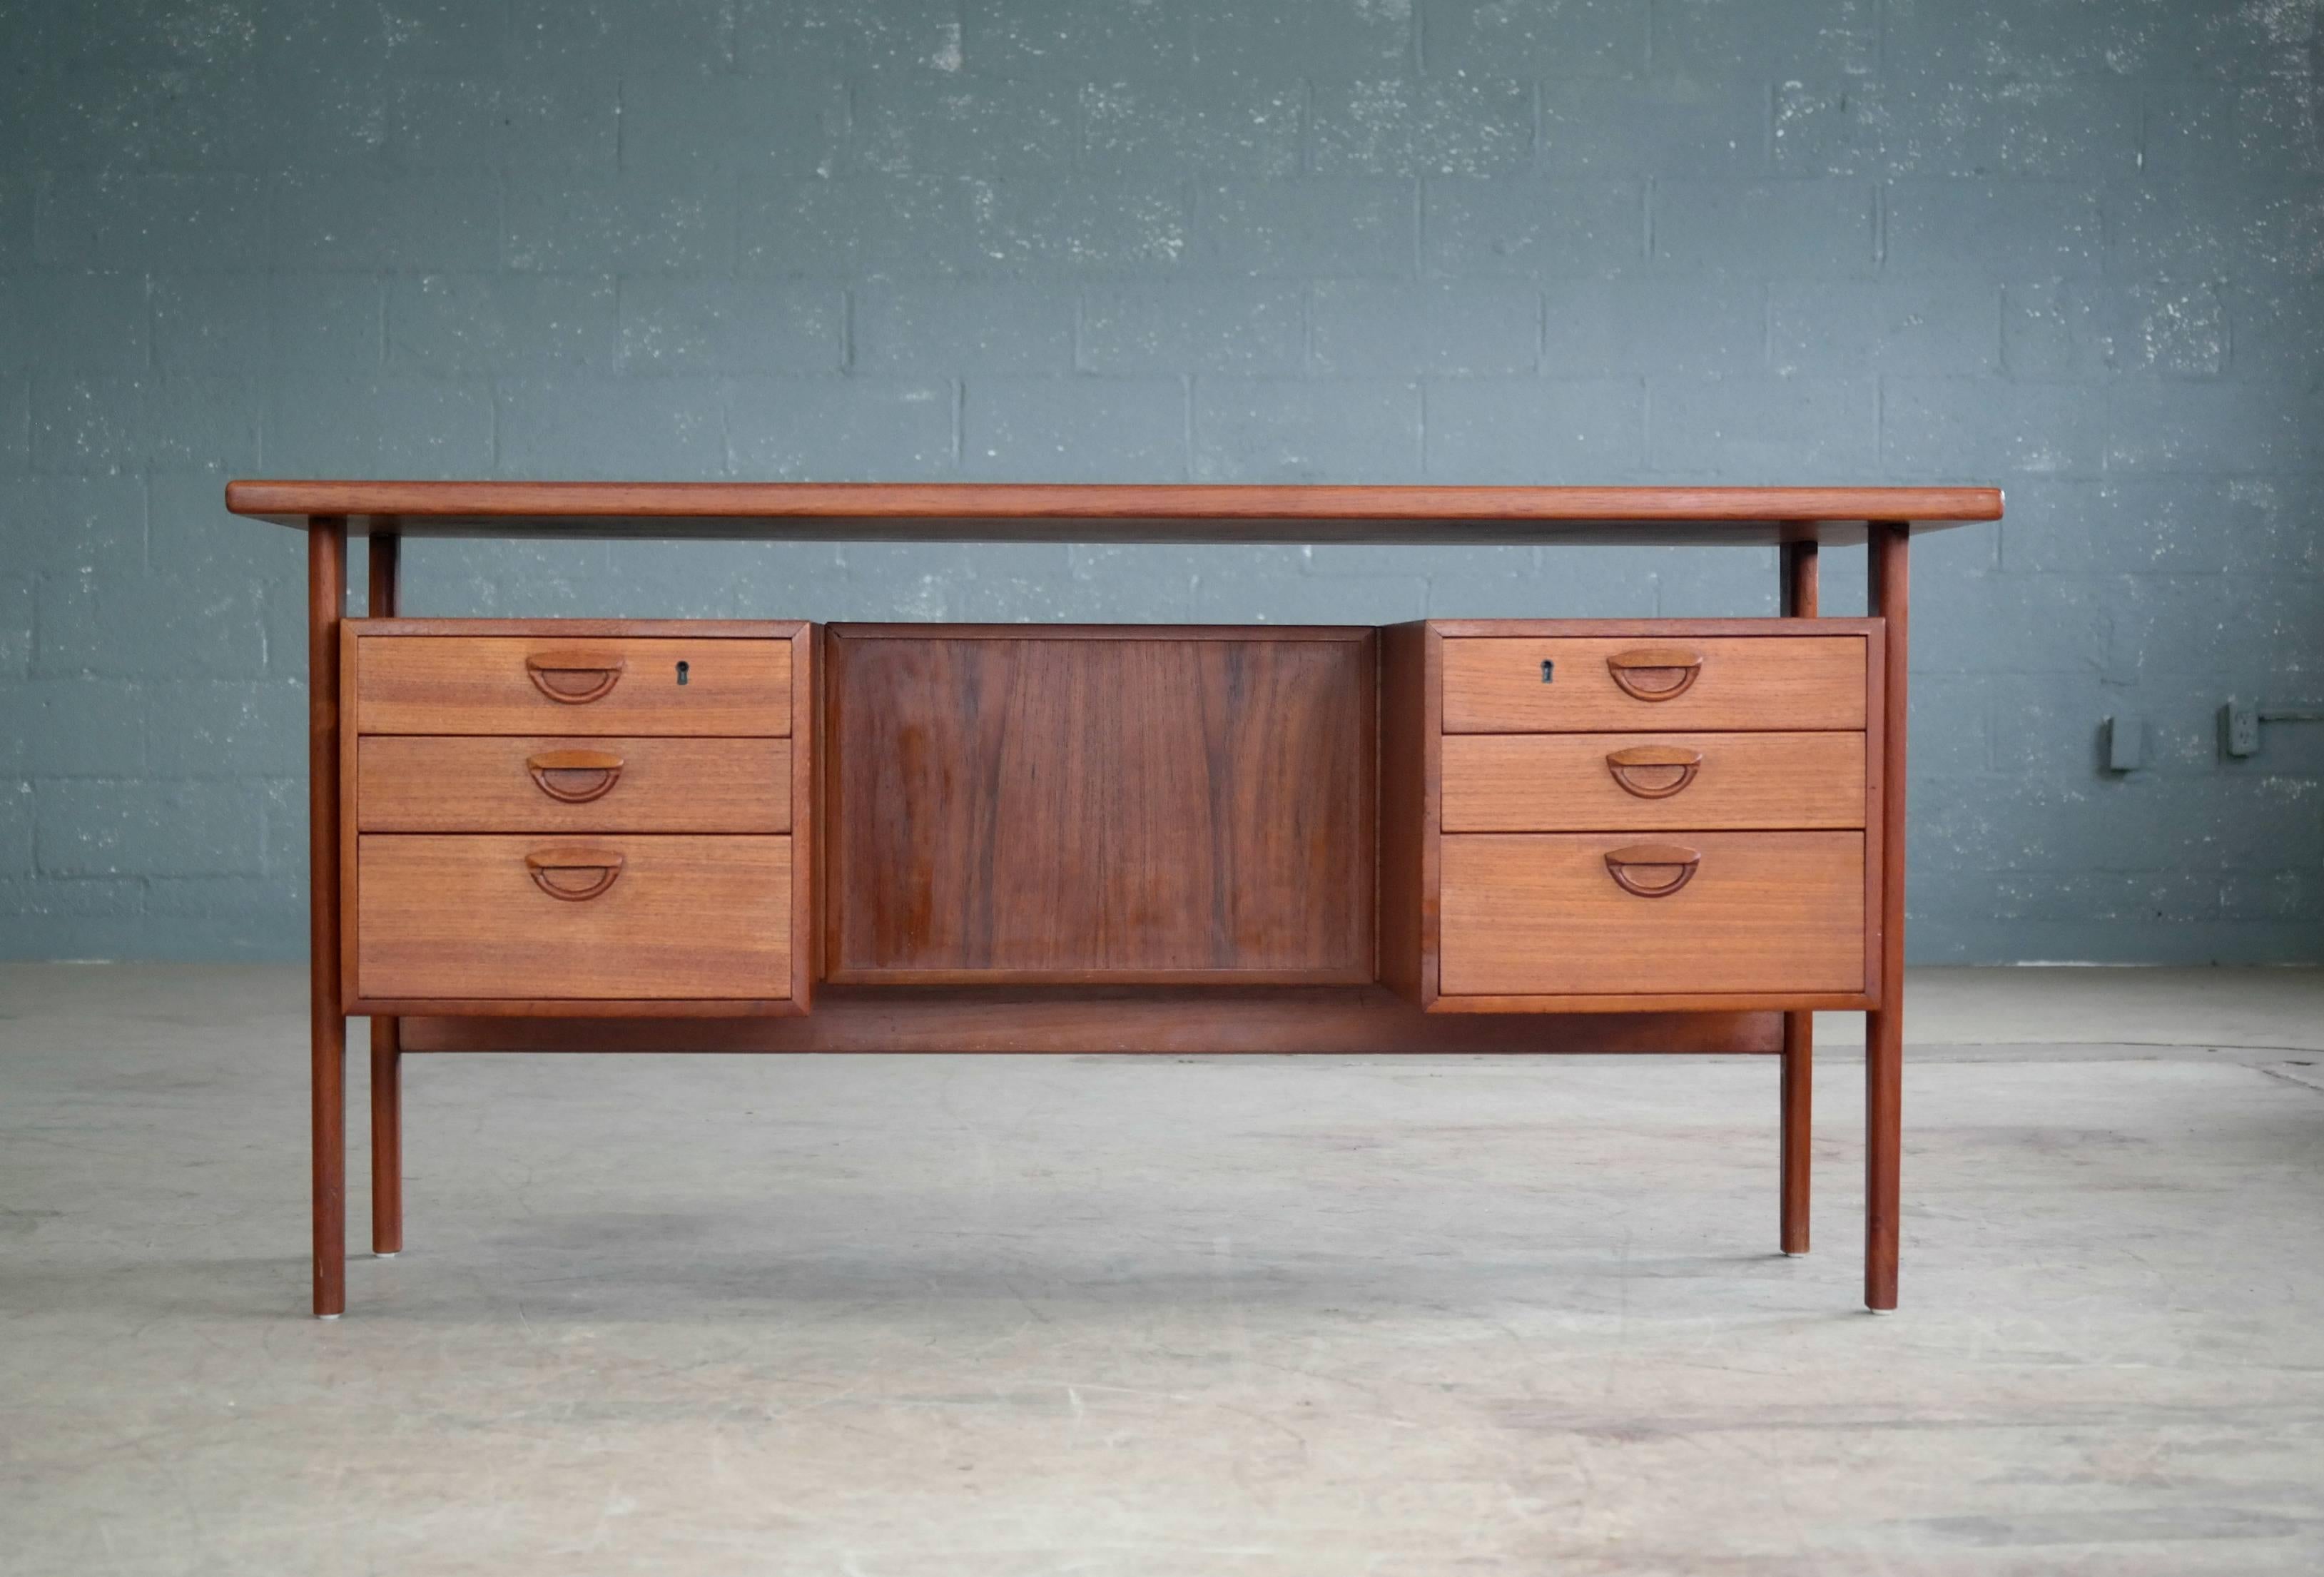 Beautiful Danish executive desk in teak designed in 1958 by Kai Kristiansen for Feldballe's Møbelfabrik as Model FM60. This freestanding desk features a floating top and six drawers in the front two of them lockable (key included) and three finished